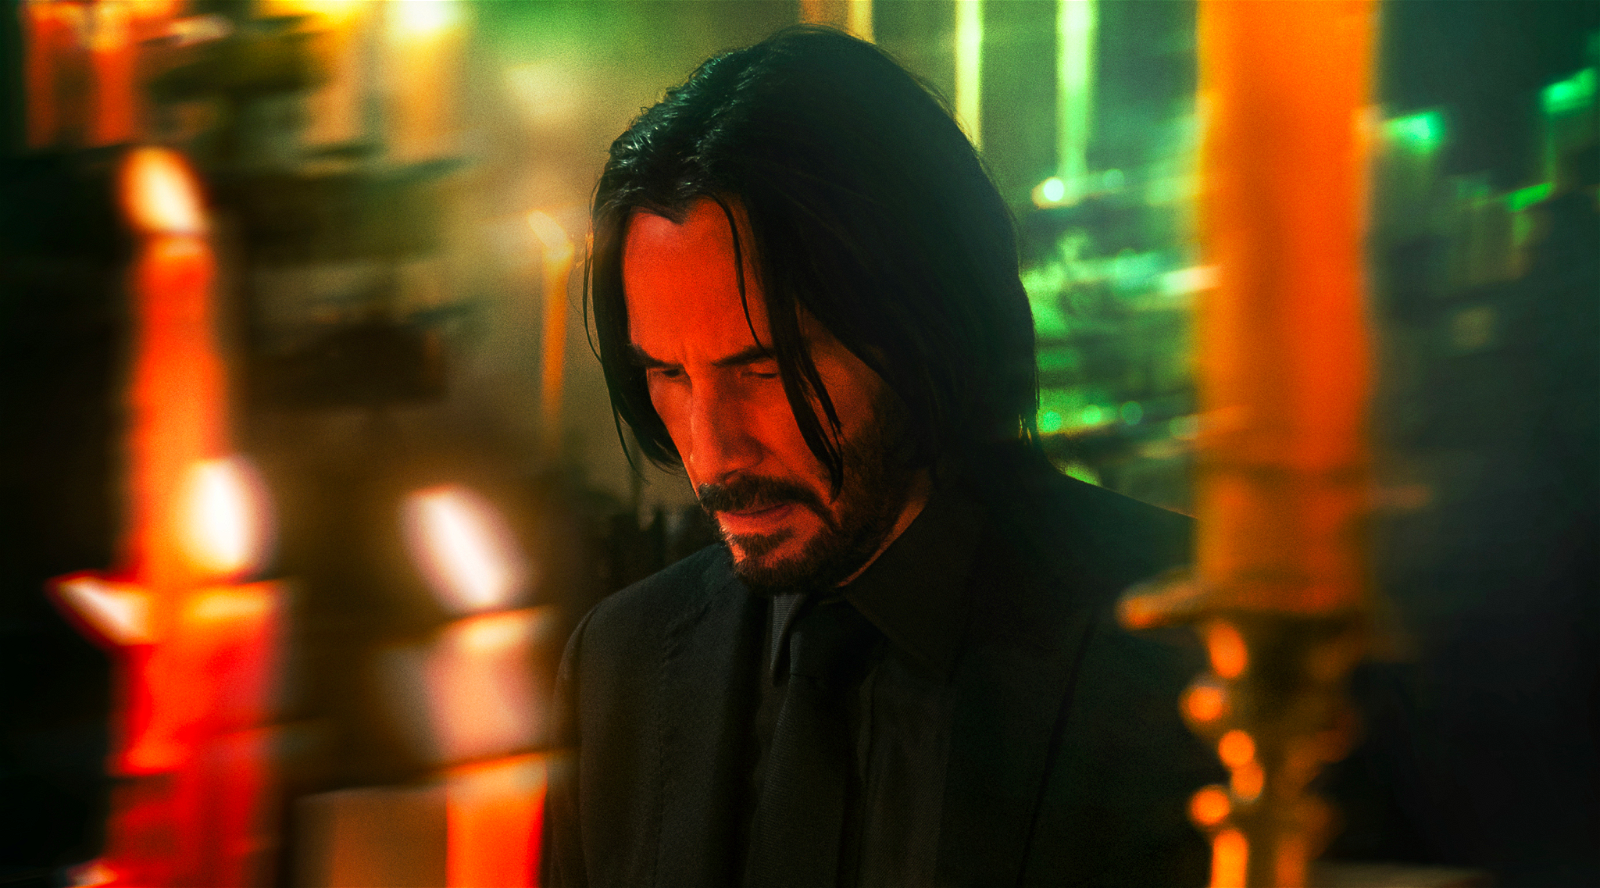 Keanu Reeves as seen in the trailer for John Wick 4.